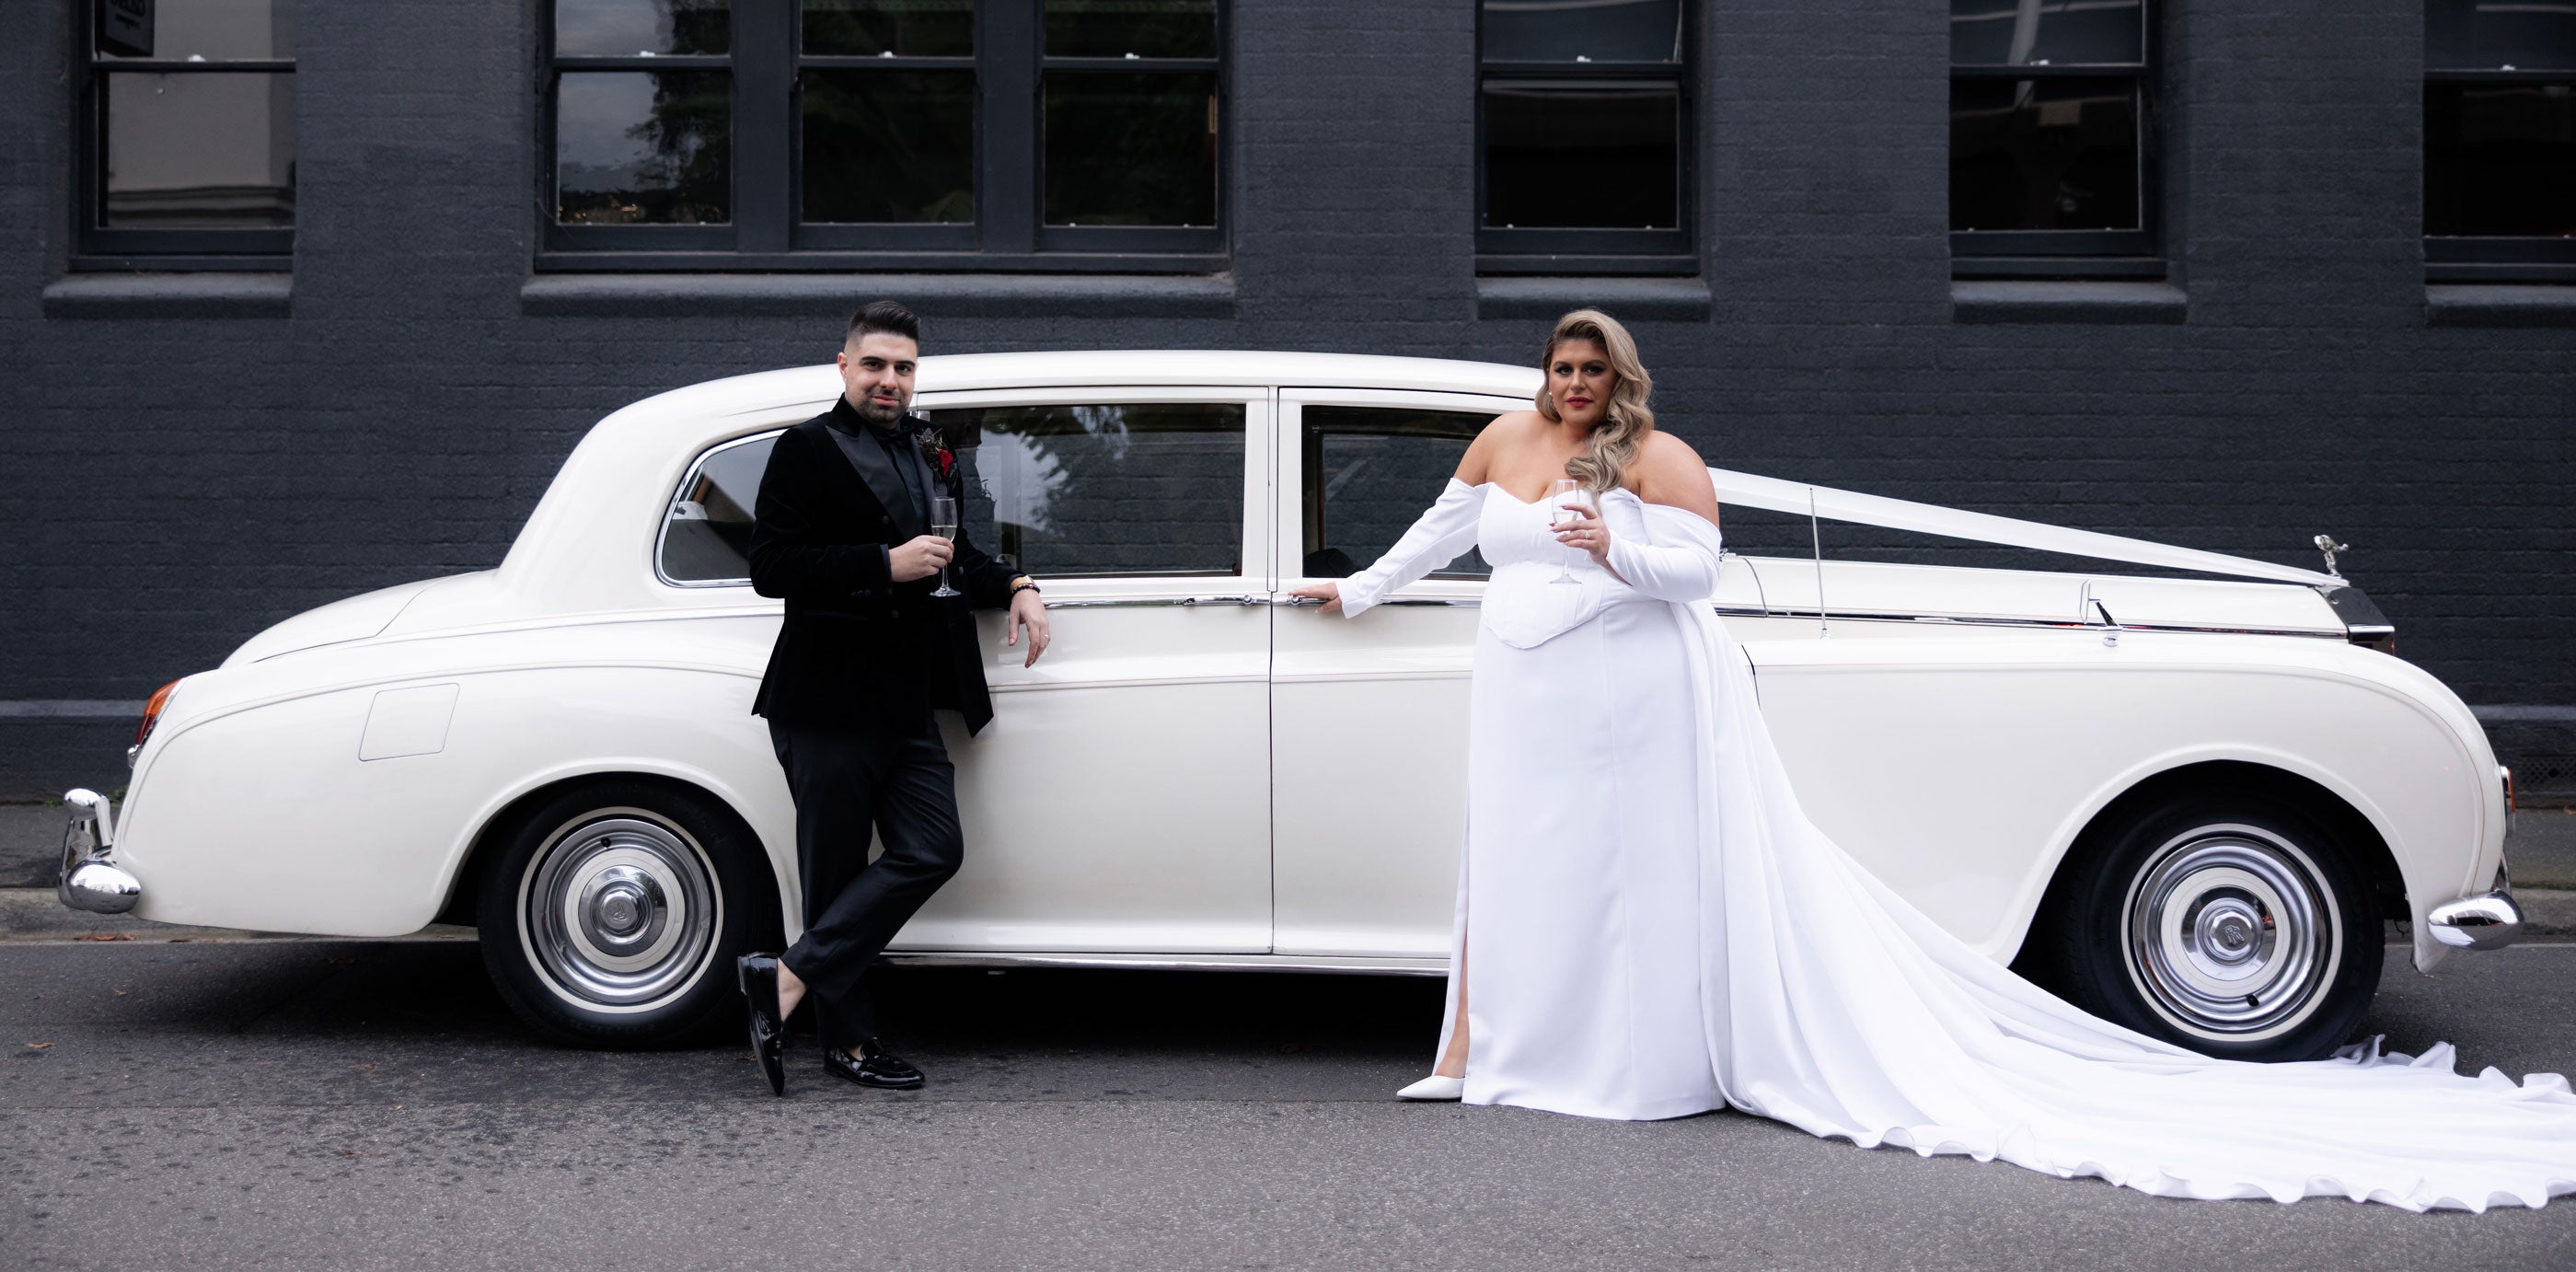 Plus size wedding dress in white. custom made Hope and Harvest Wedding gown. Melbourne Wedding Designer. Bride stands in front of classic Jag in wearing white. Groom wears black suit